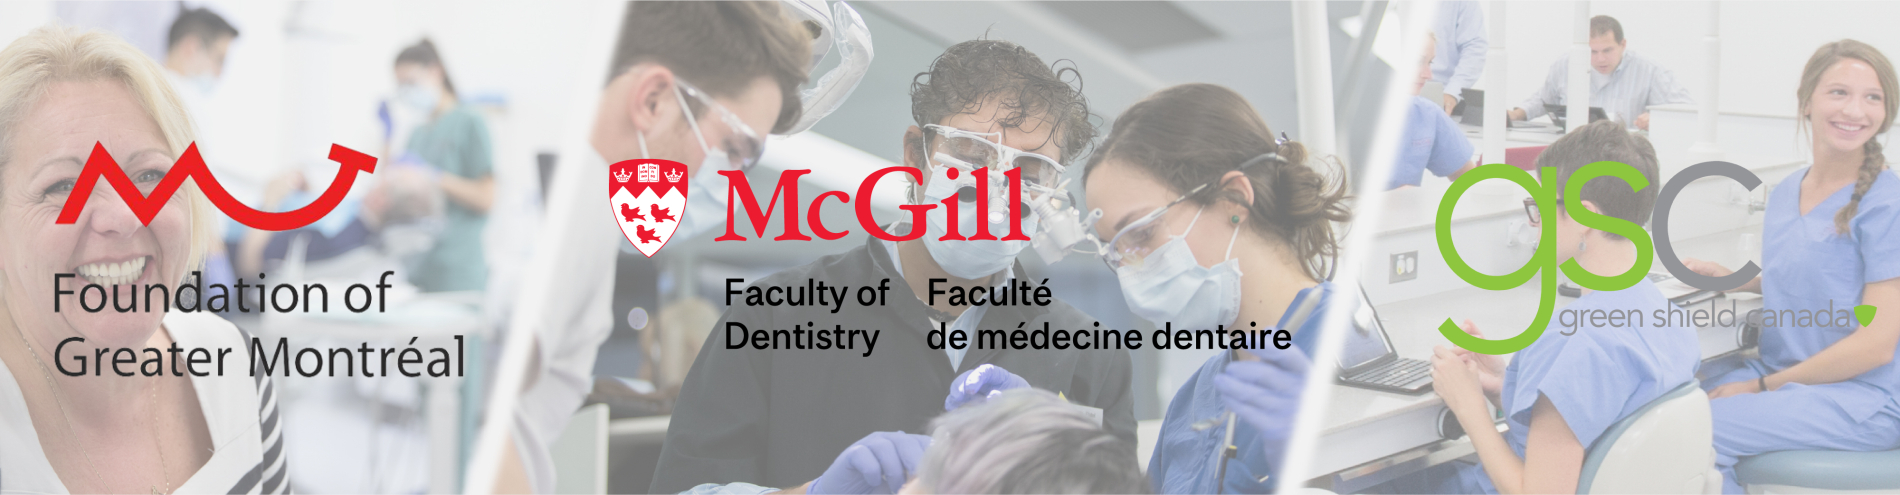 Foundation of Greater Montreal, Faculty of Dentistry, GreenShield Canada